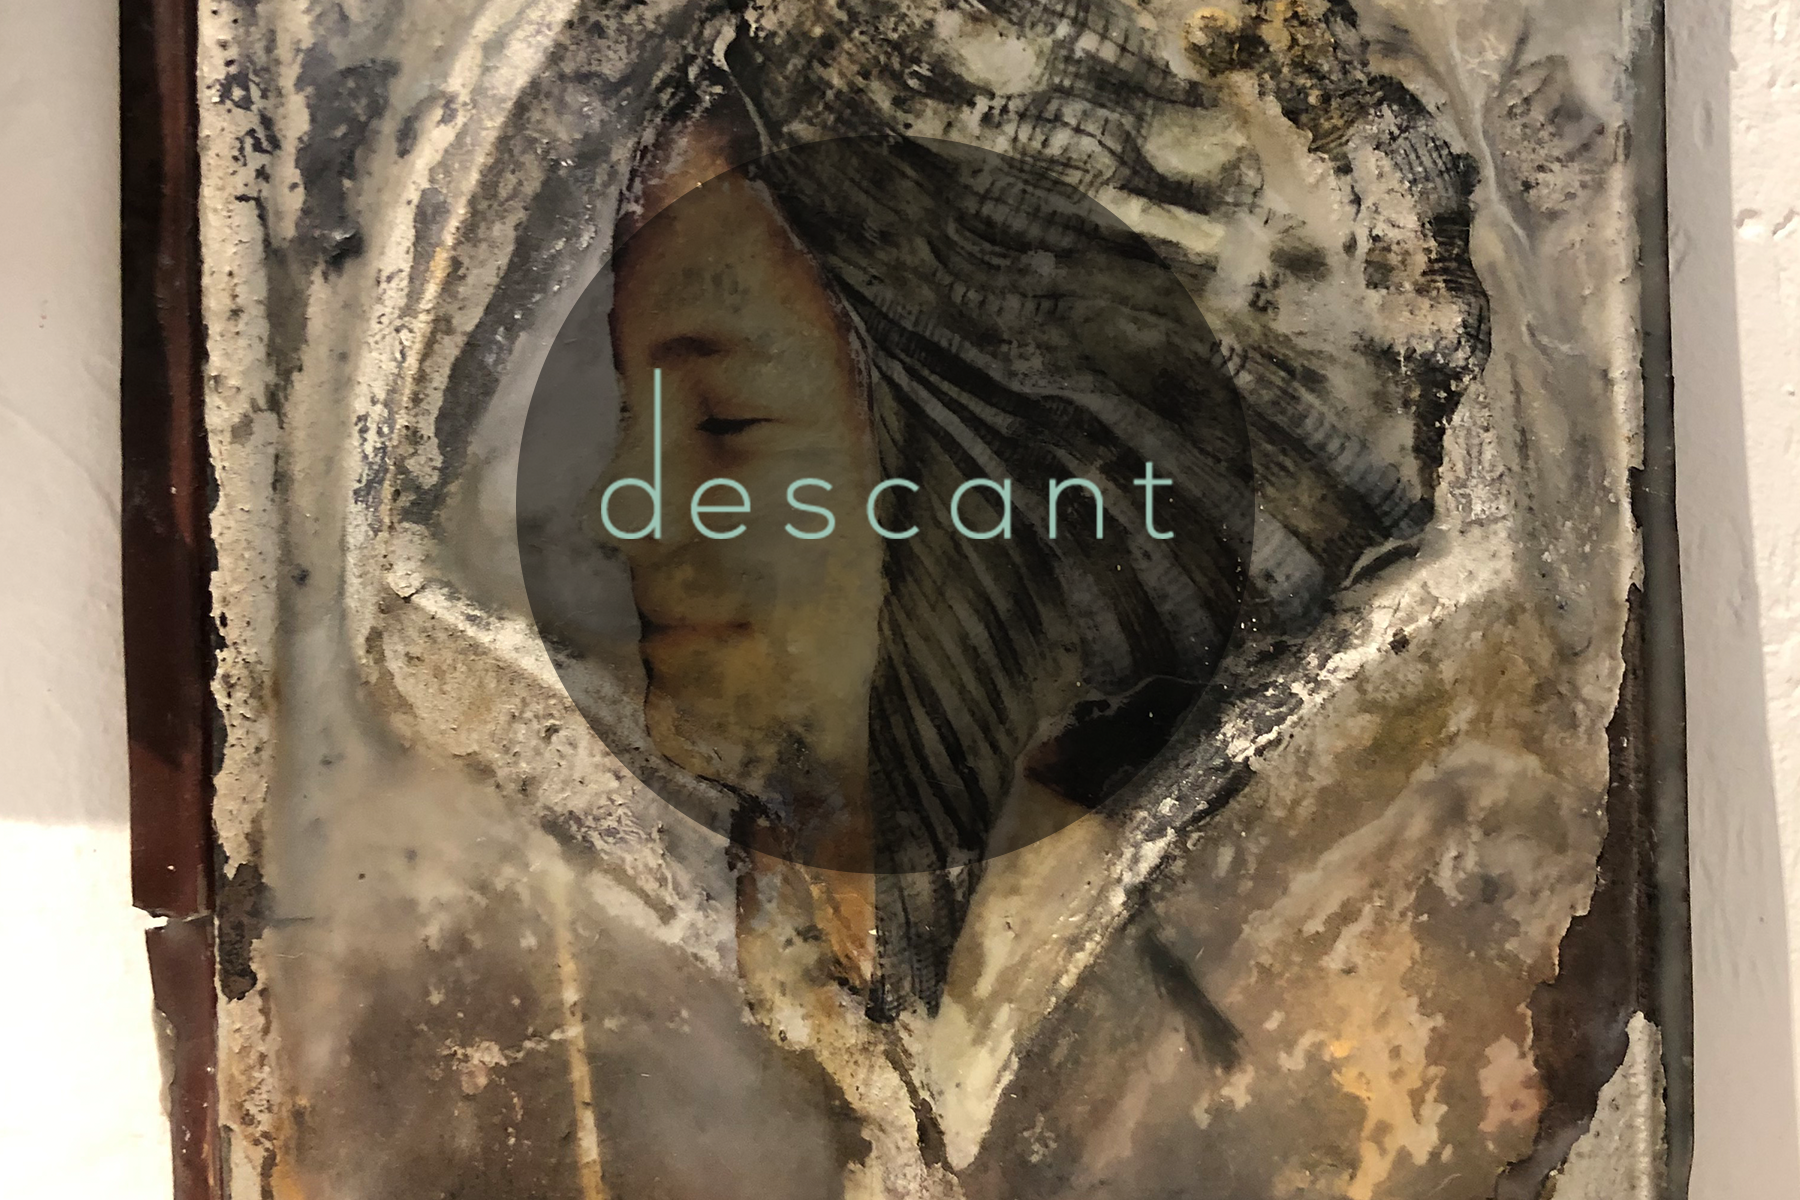 the image shows a wood carving/paining of a girl with black hair smiling while only showing the left half of her face. There is a gray cirlce over the image and the word descant is atop the circle in teal letters